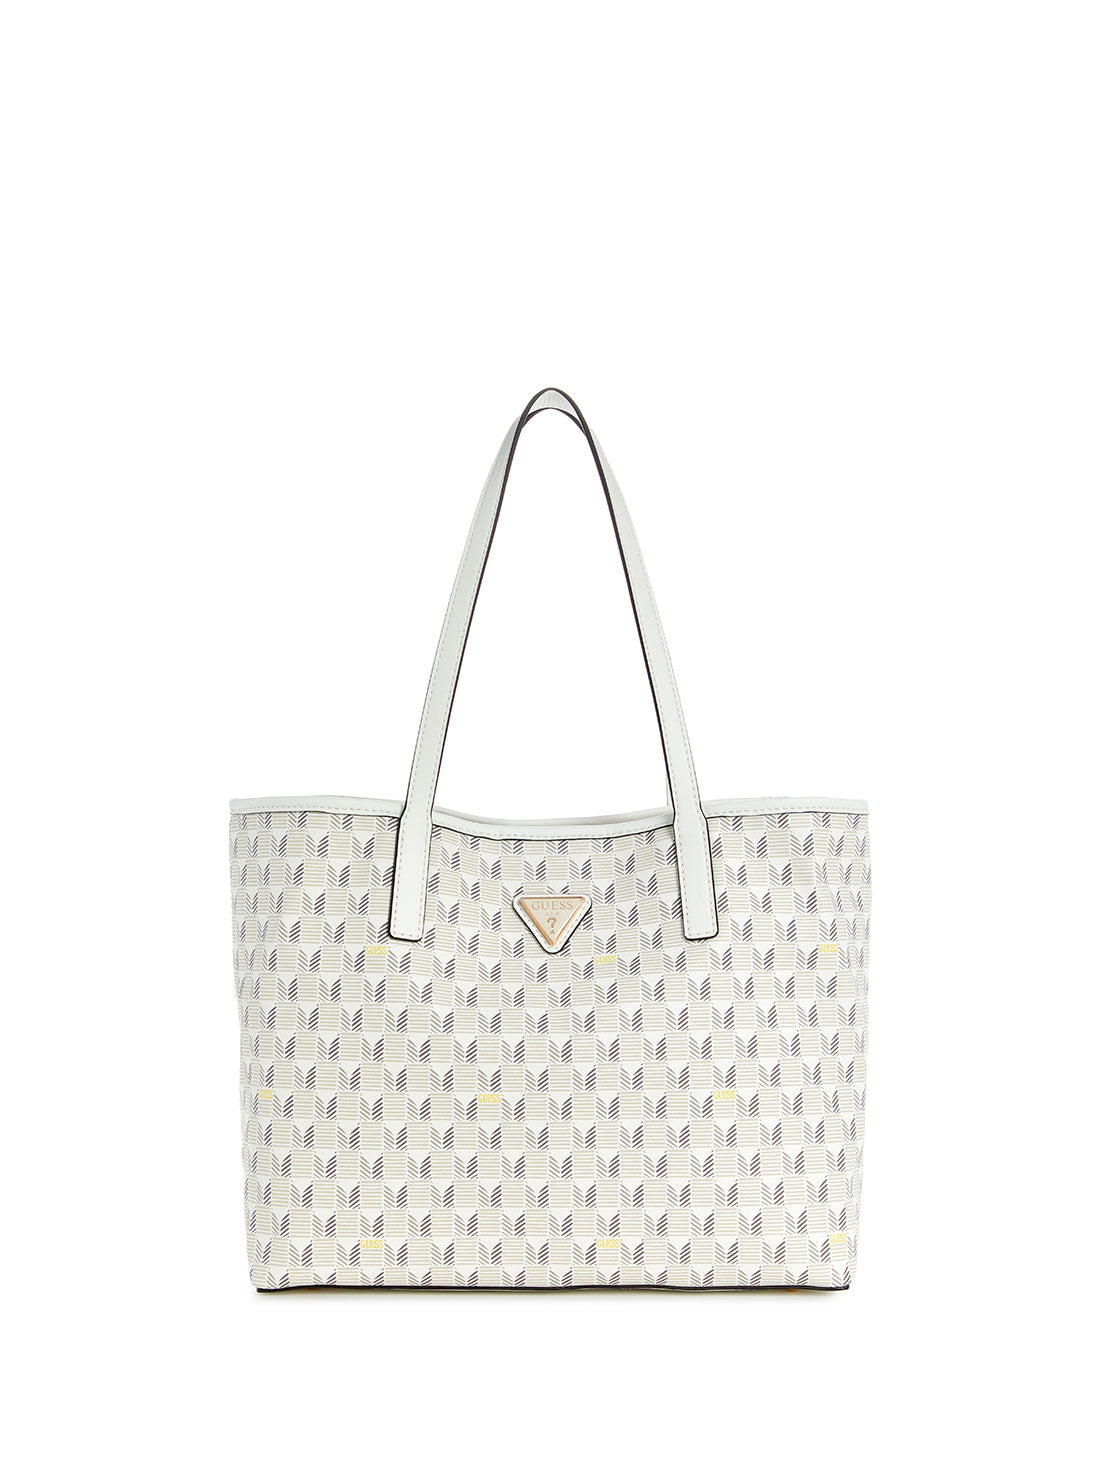 GUESS White Logo Vikky 2 in 1 Tote Bag front view 